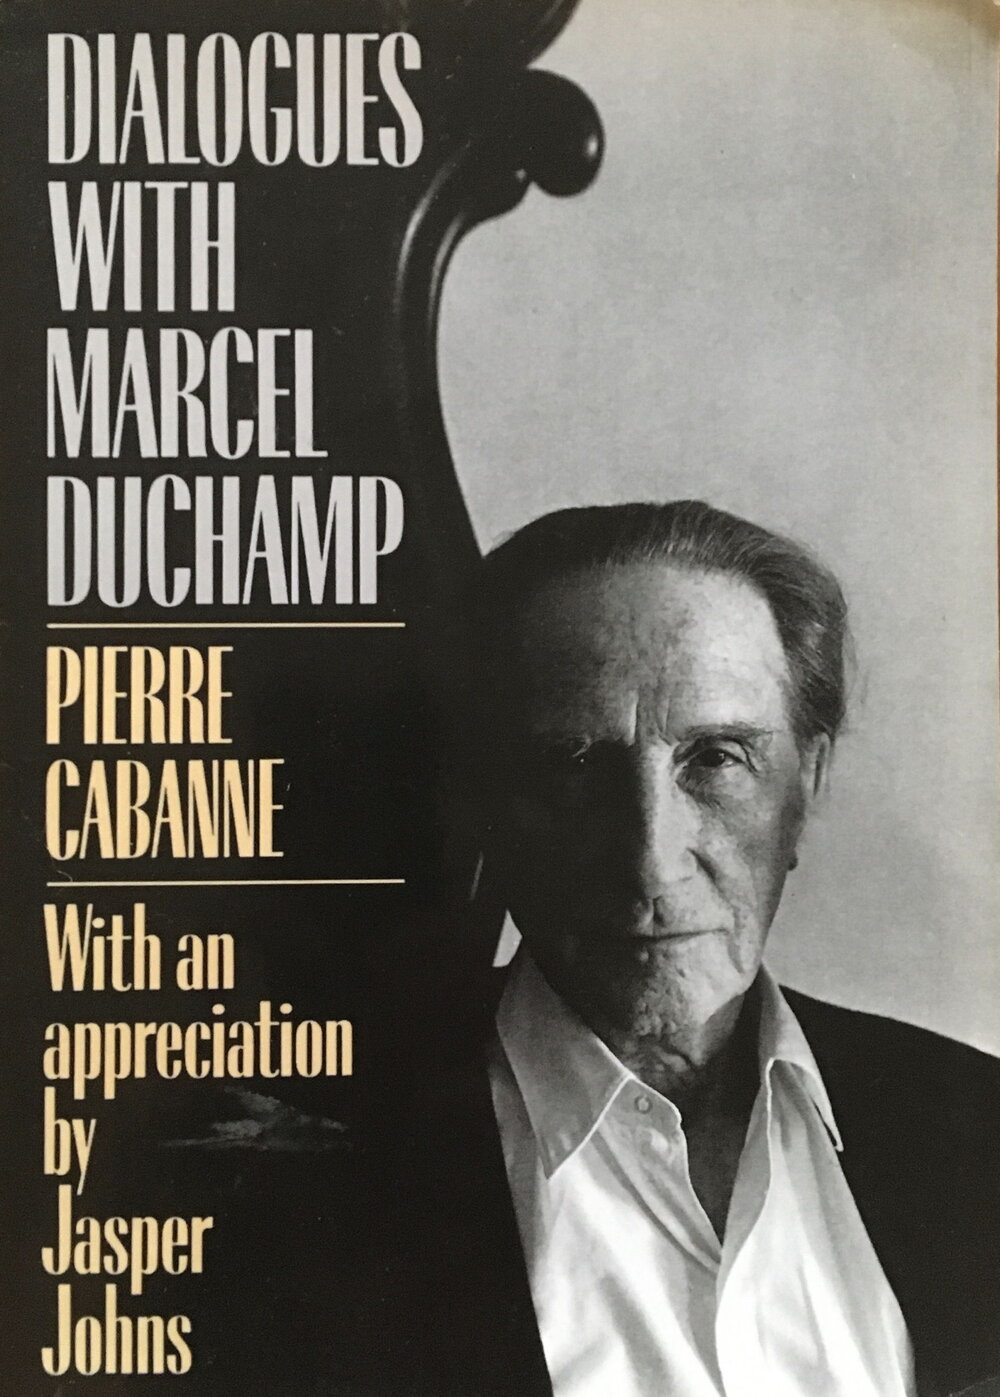 Dialogues with Duchamp | Red Ladder Studio